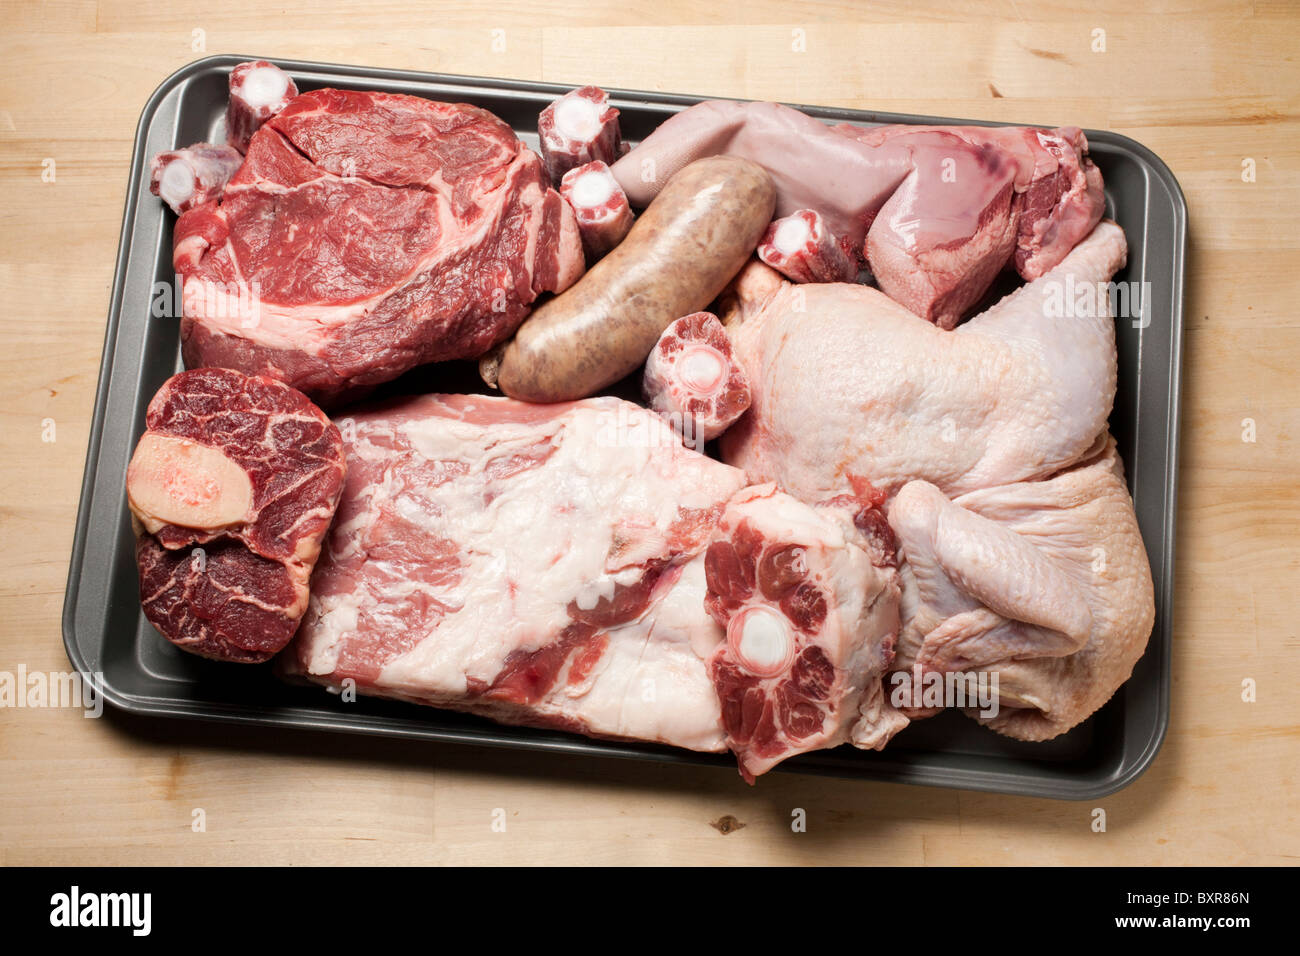 Raw ingredients for bolito misto, the classic Northern Italian meat stew Stock Photo